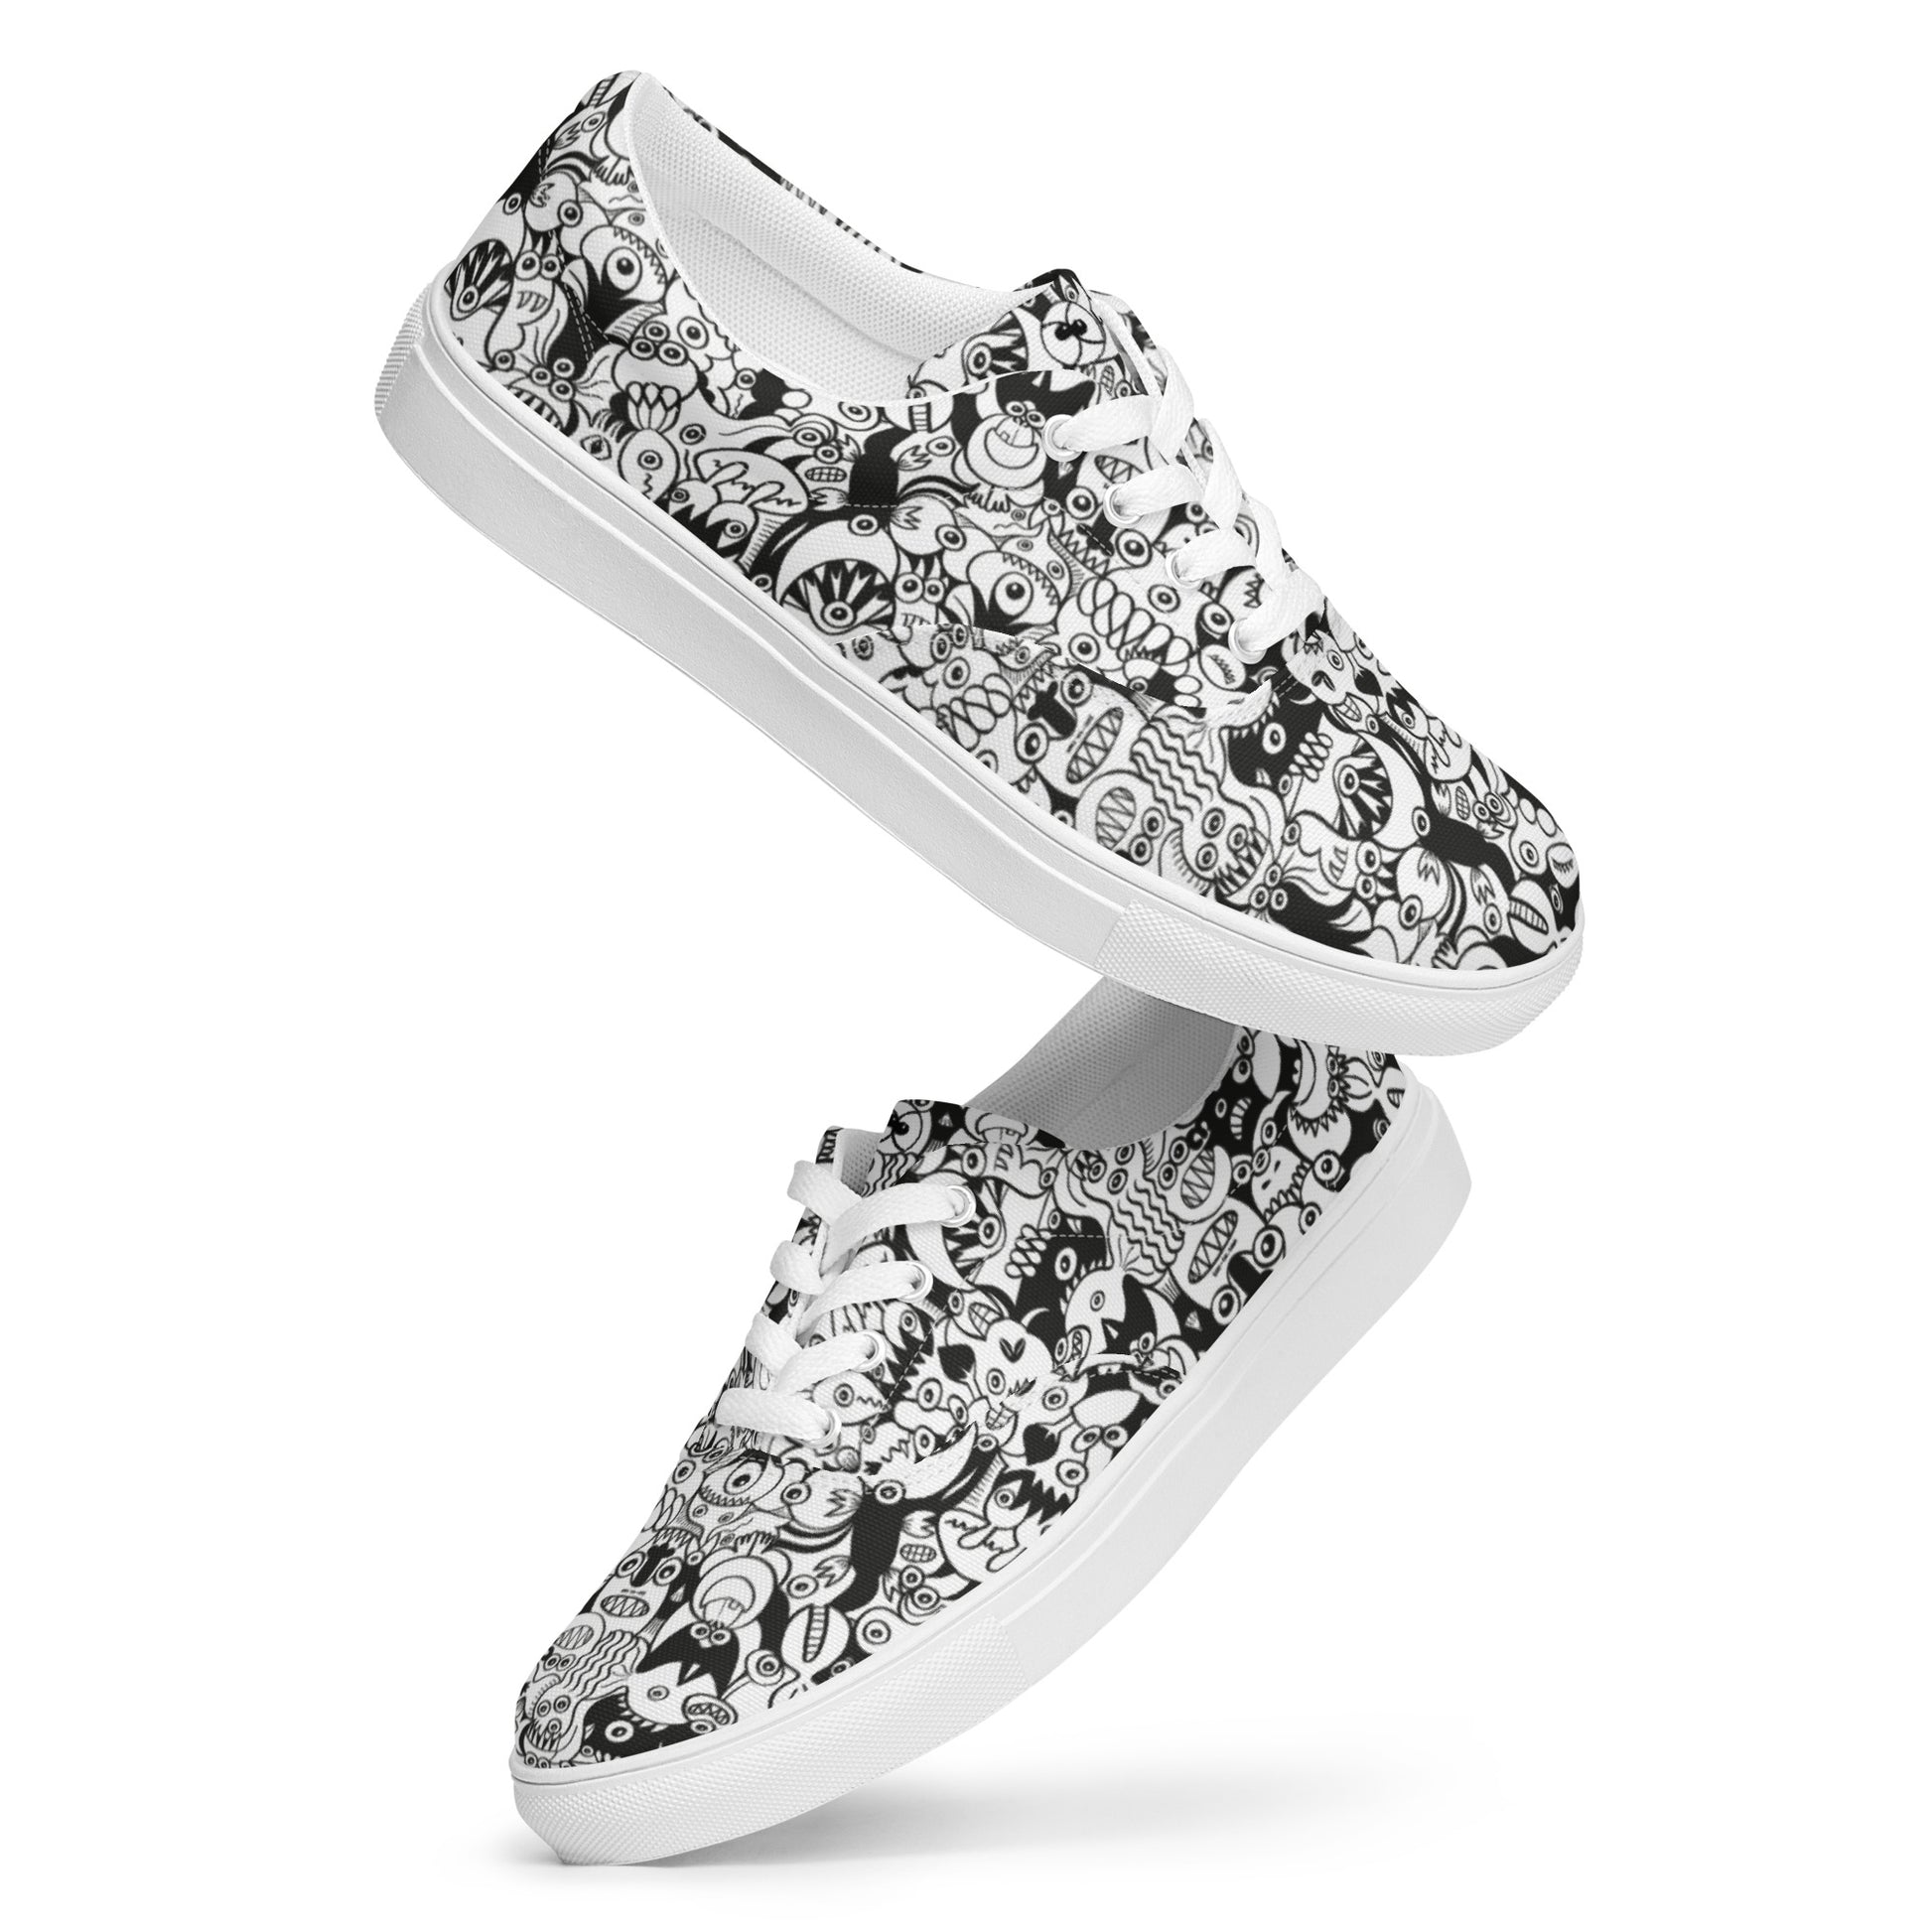 Black and white cool doodles art Men’s lace-up canvas shoes. Playing with shoes